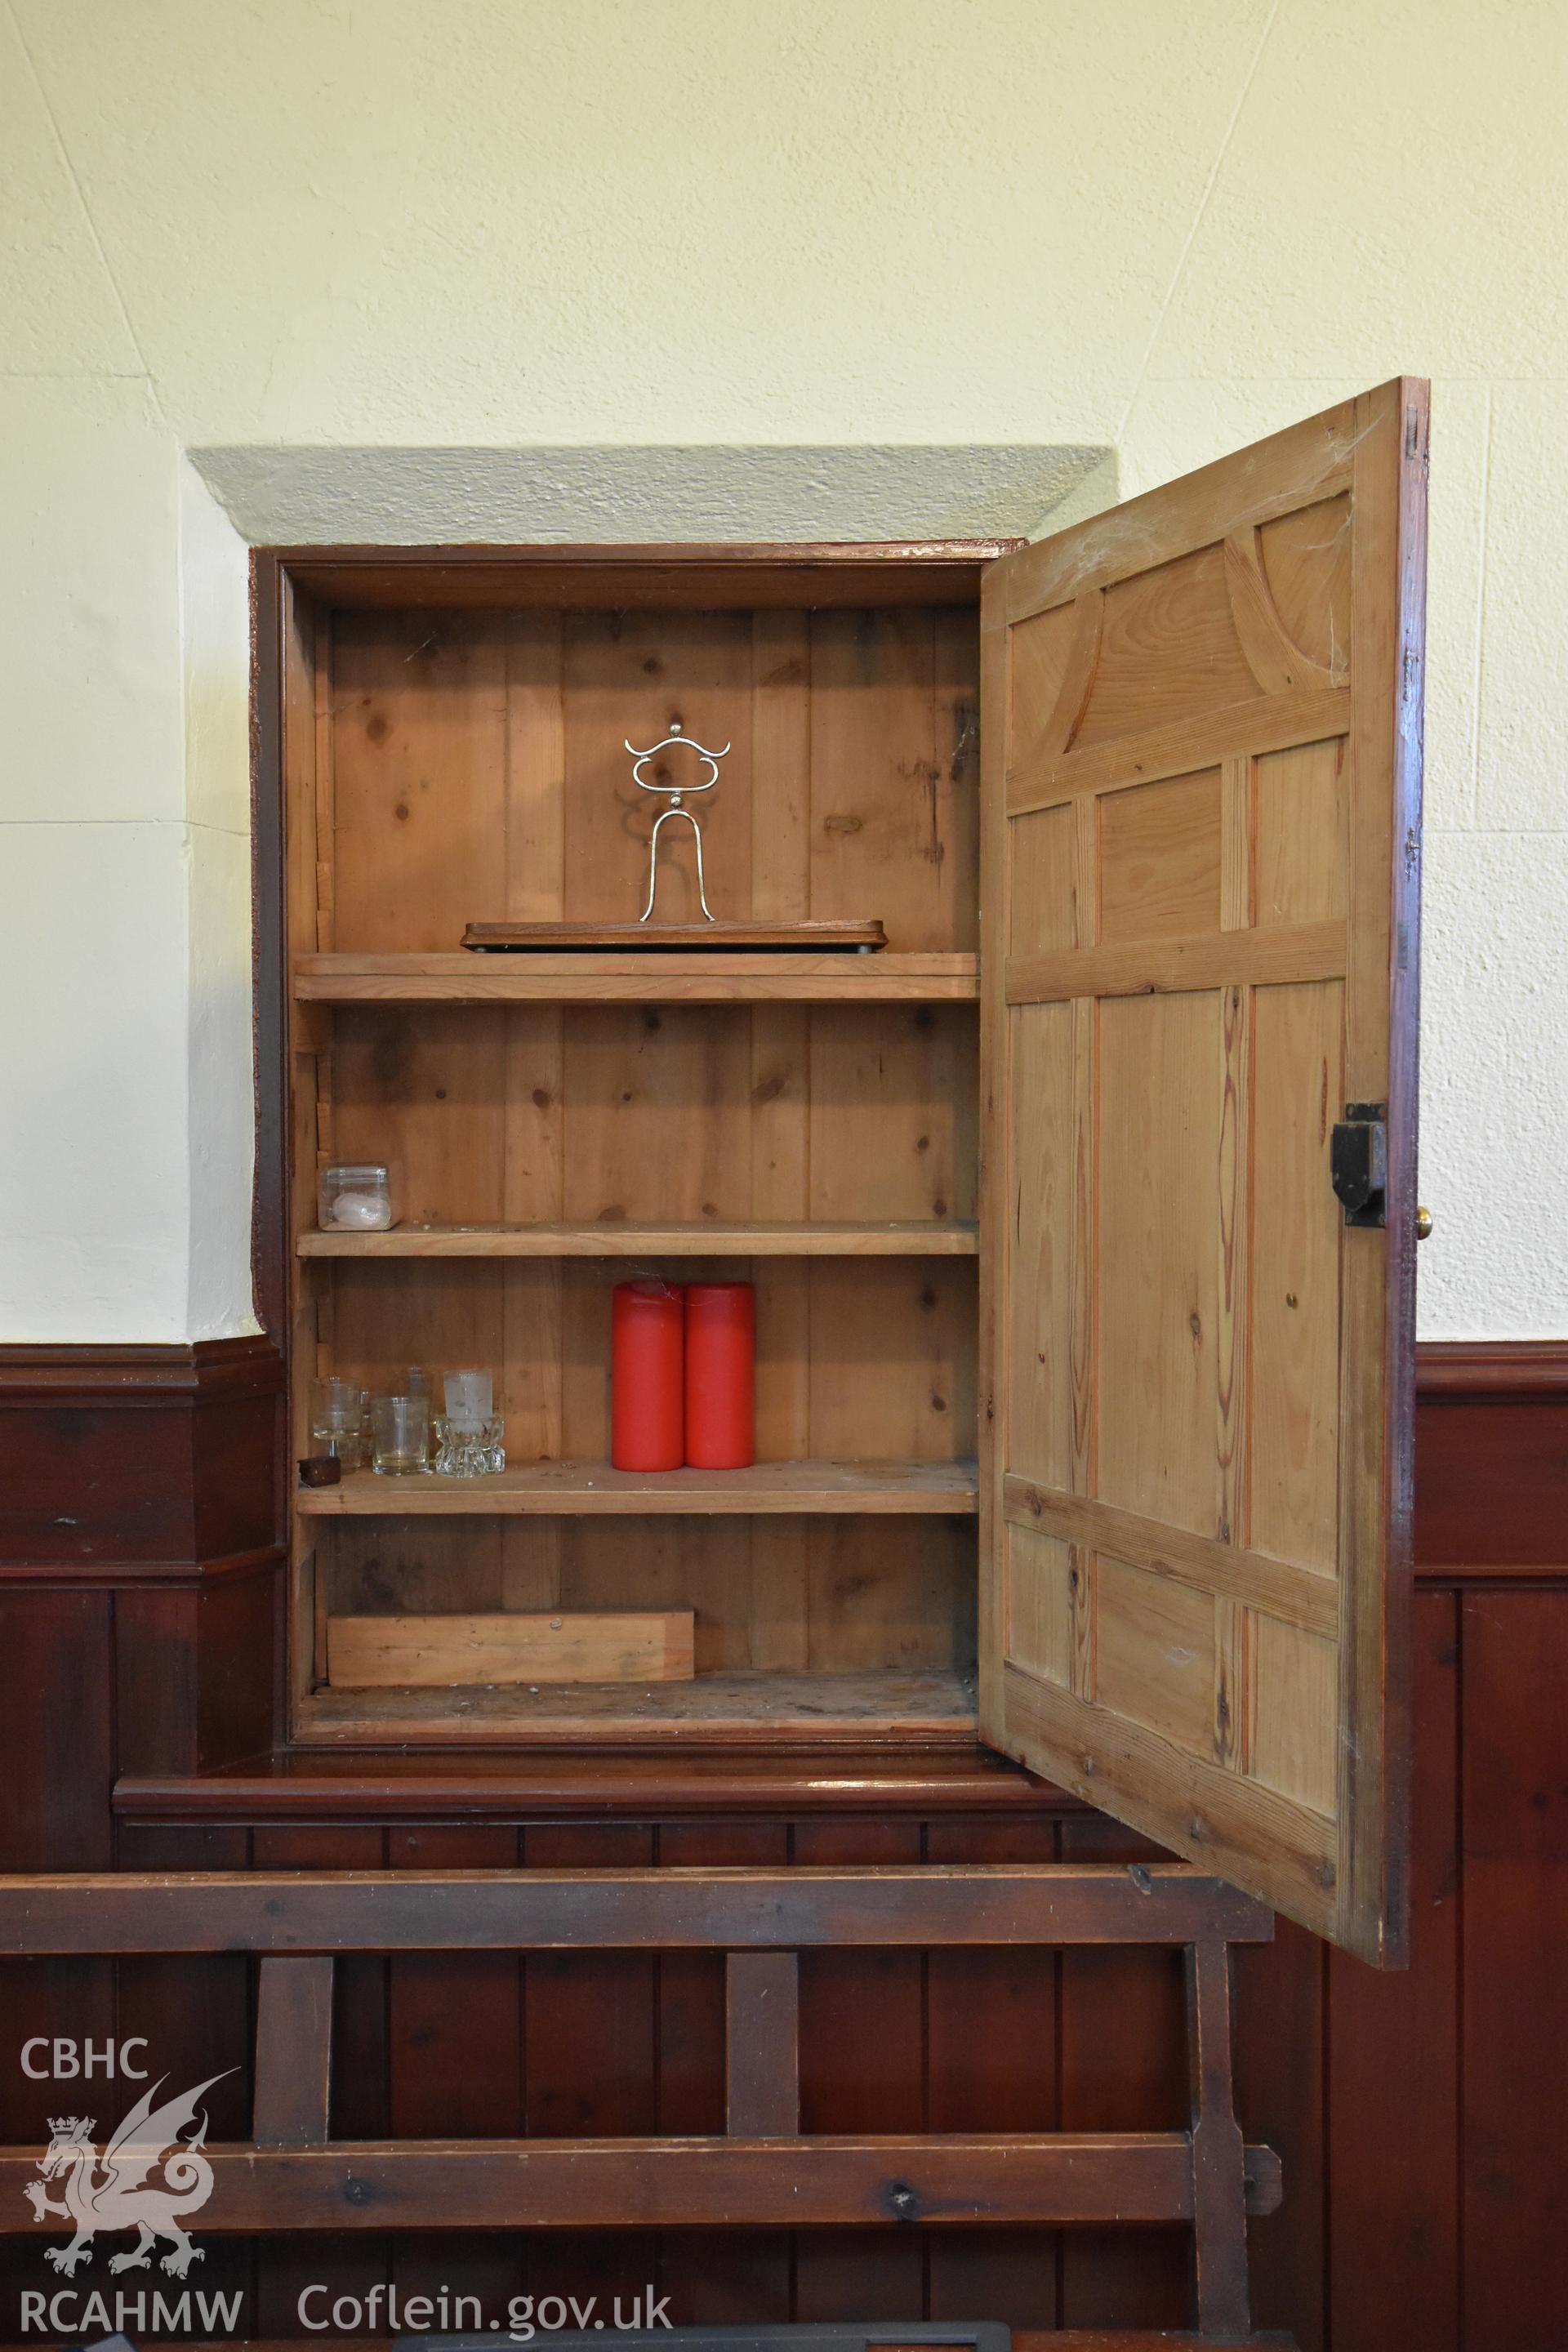 Detailed view of panelling, bench and open wooden cupboard at the rear Hyssington Primitive Methodist Chapel, Hyssington, Churchstoke. Photographic survey conducted by Sue Fielding on 7th December 2018.